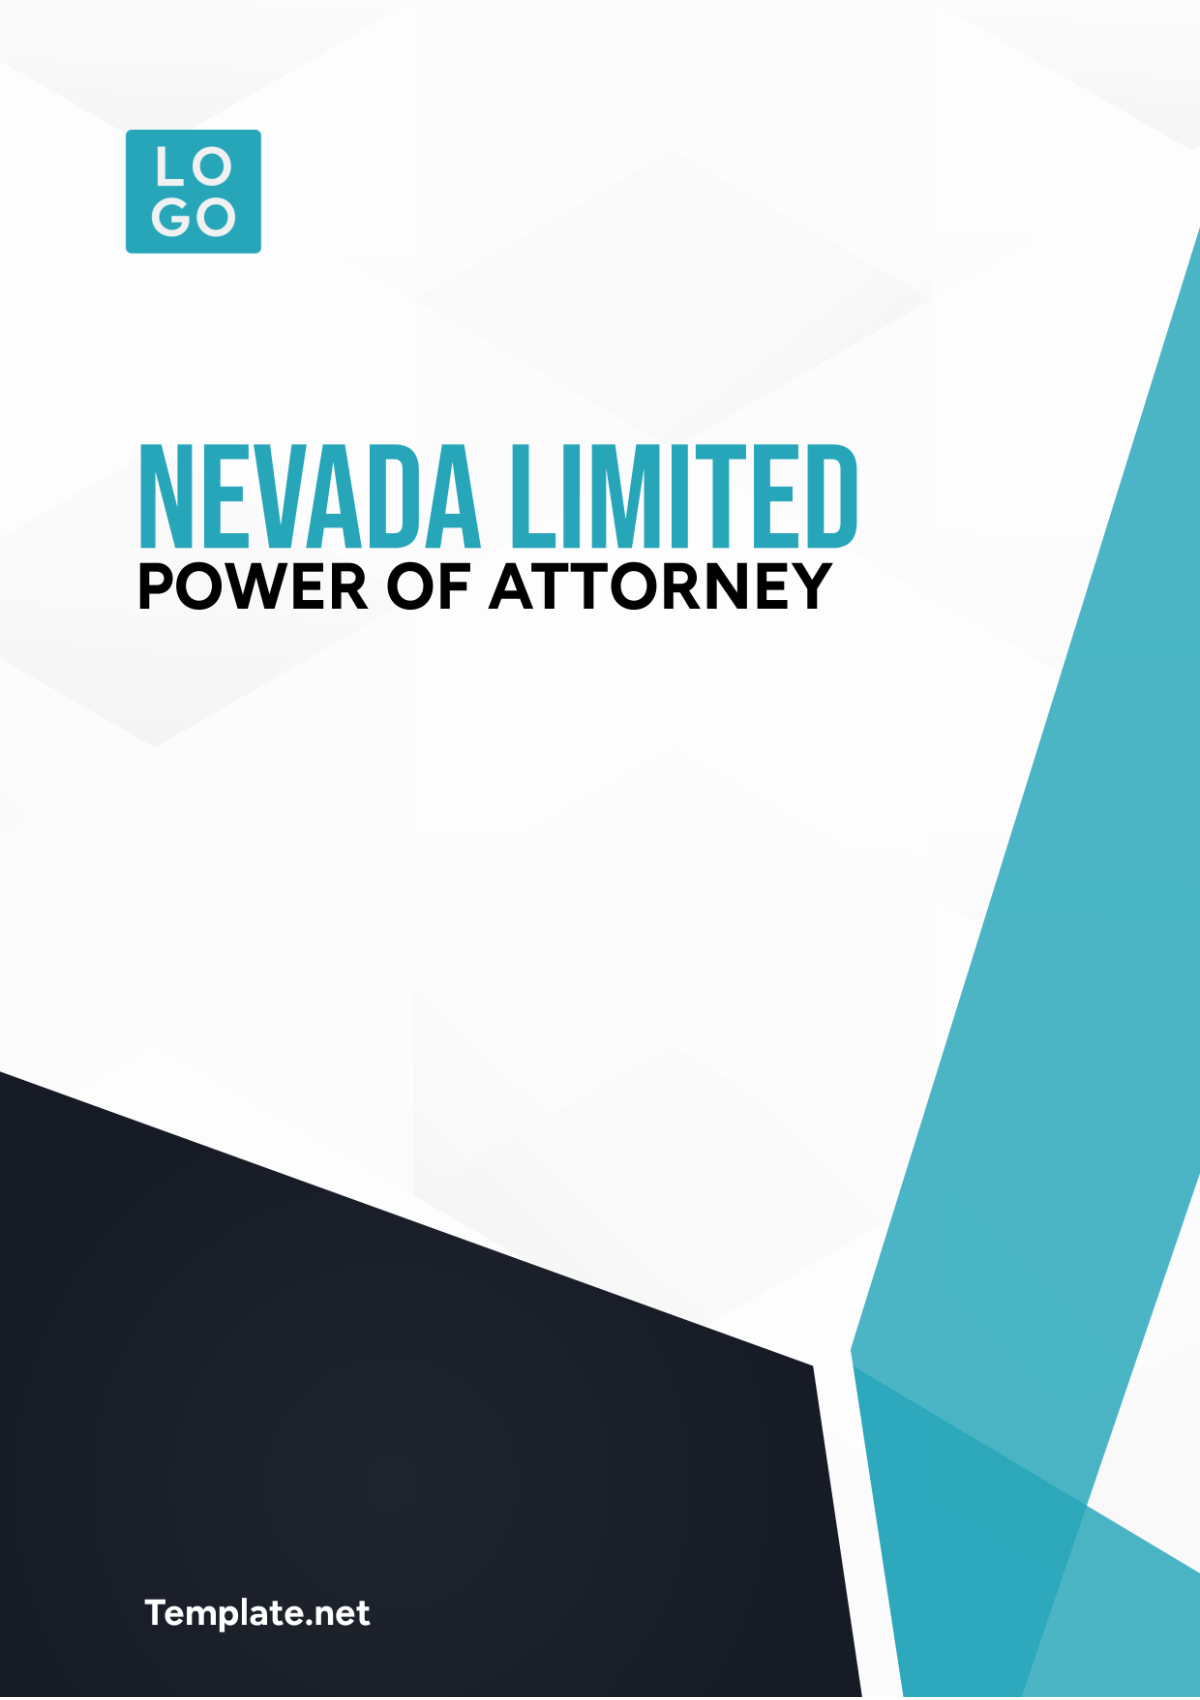 Nevada Limited Power of Attorney Template